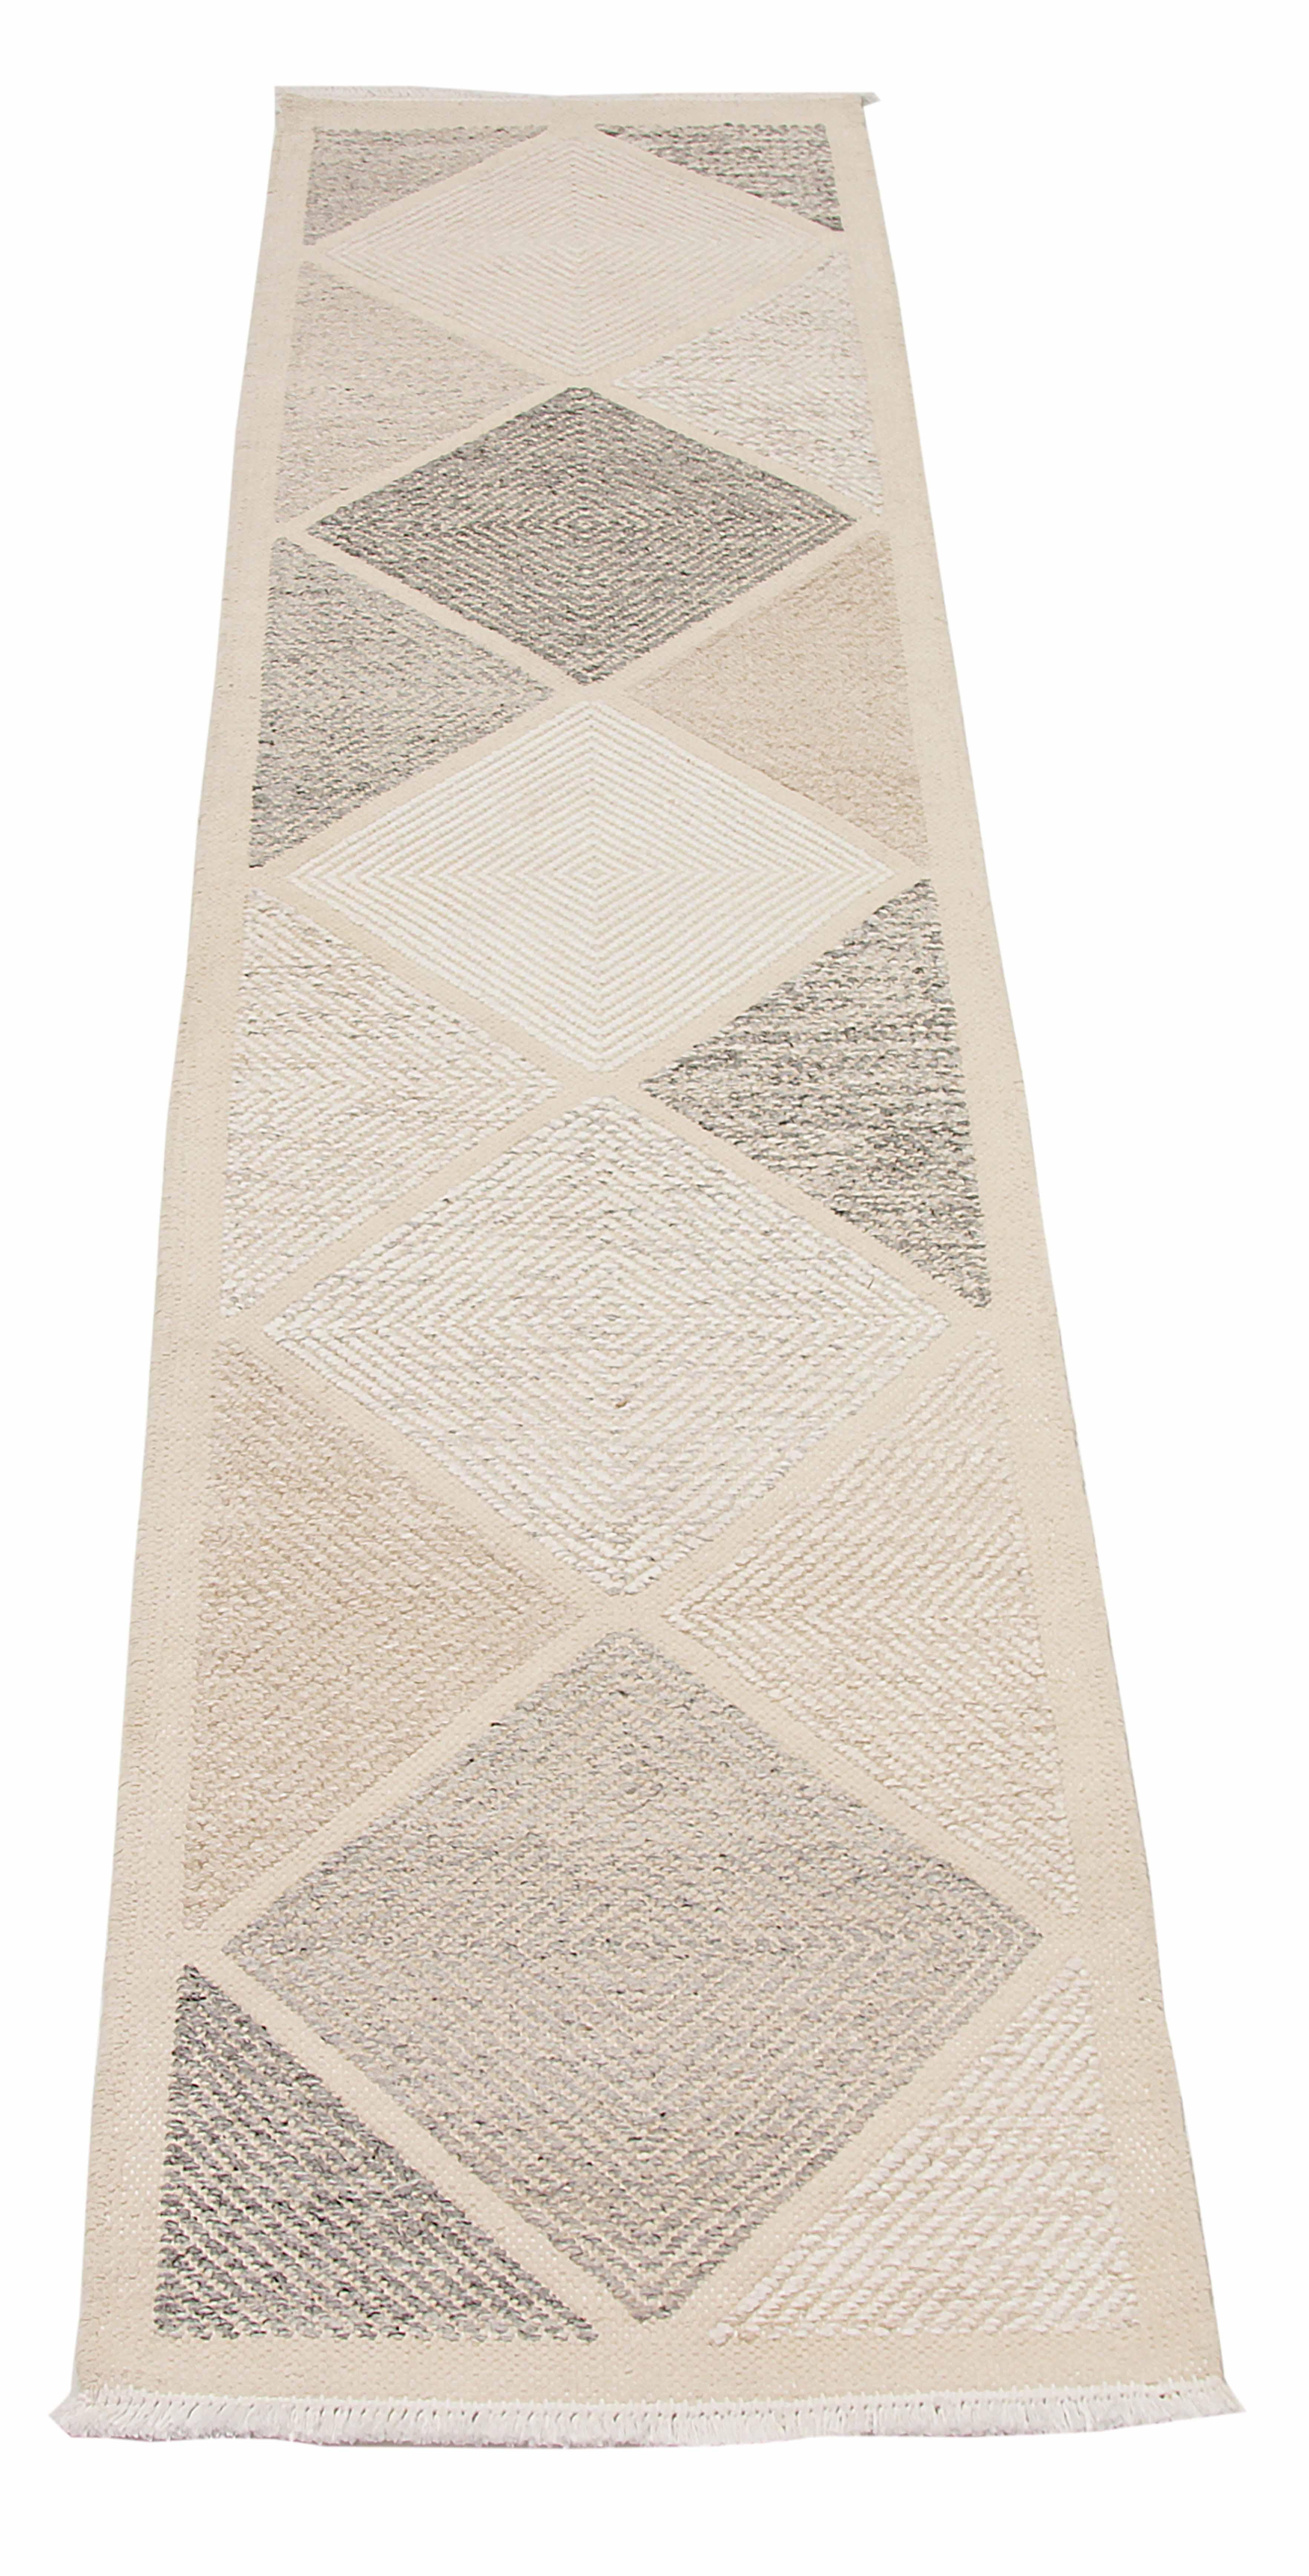 Modern runner rug handwoven from the finest sheep’s wool. It’s colored with all-natural vegetable dyes that are safe for humans and pets. It’s a traditional Swedish design handwoven by expert artisans. It’s a lovely area rug that can be incorporated